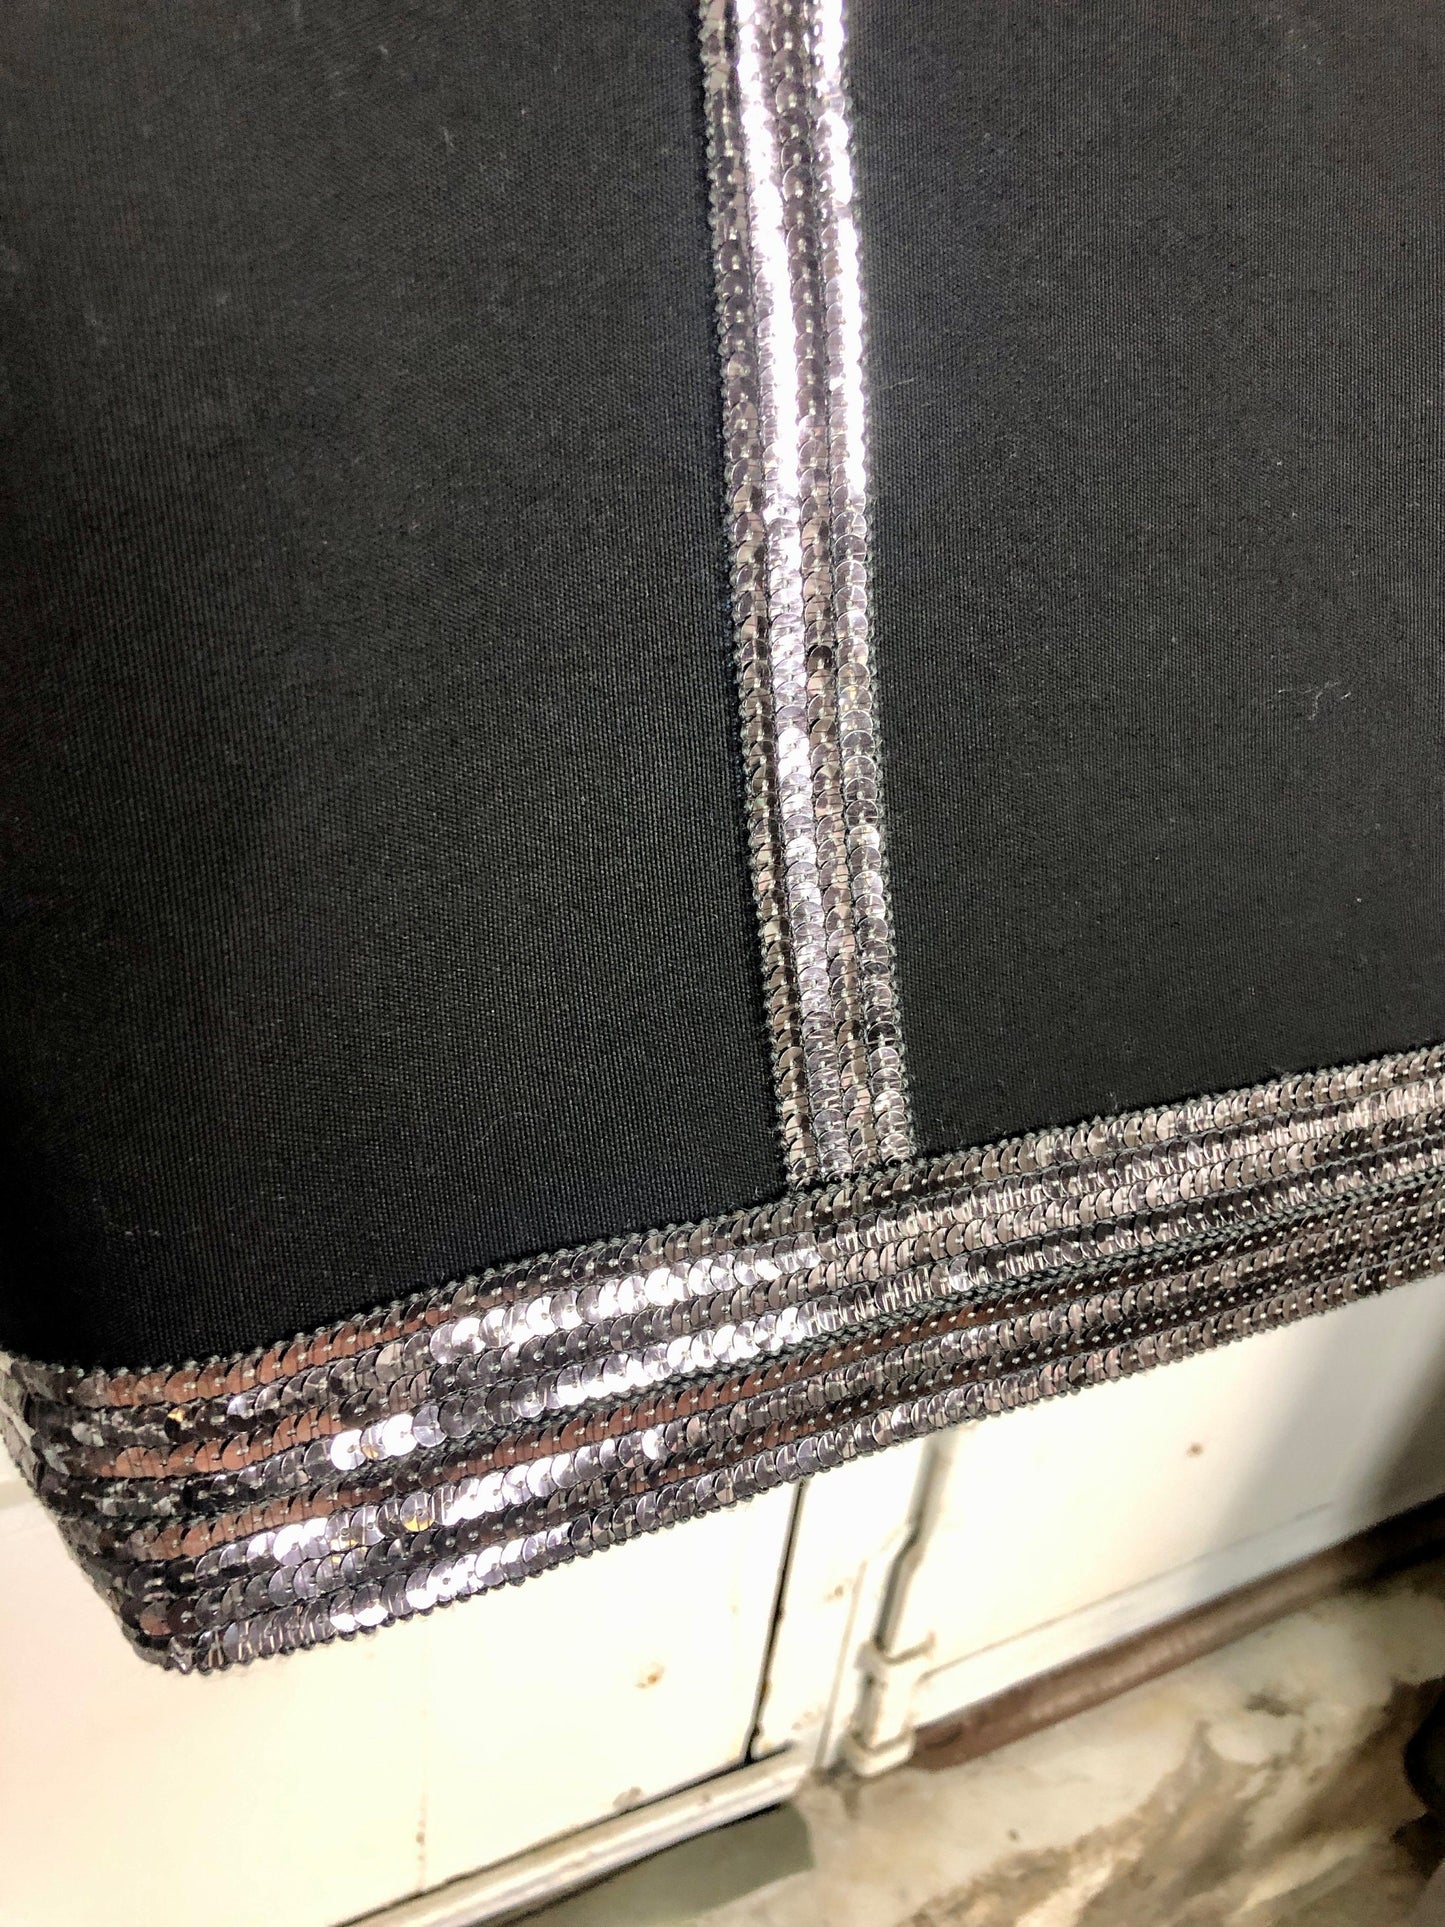 Black cotton canvas tote bag with silver sequin braid